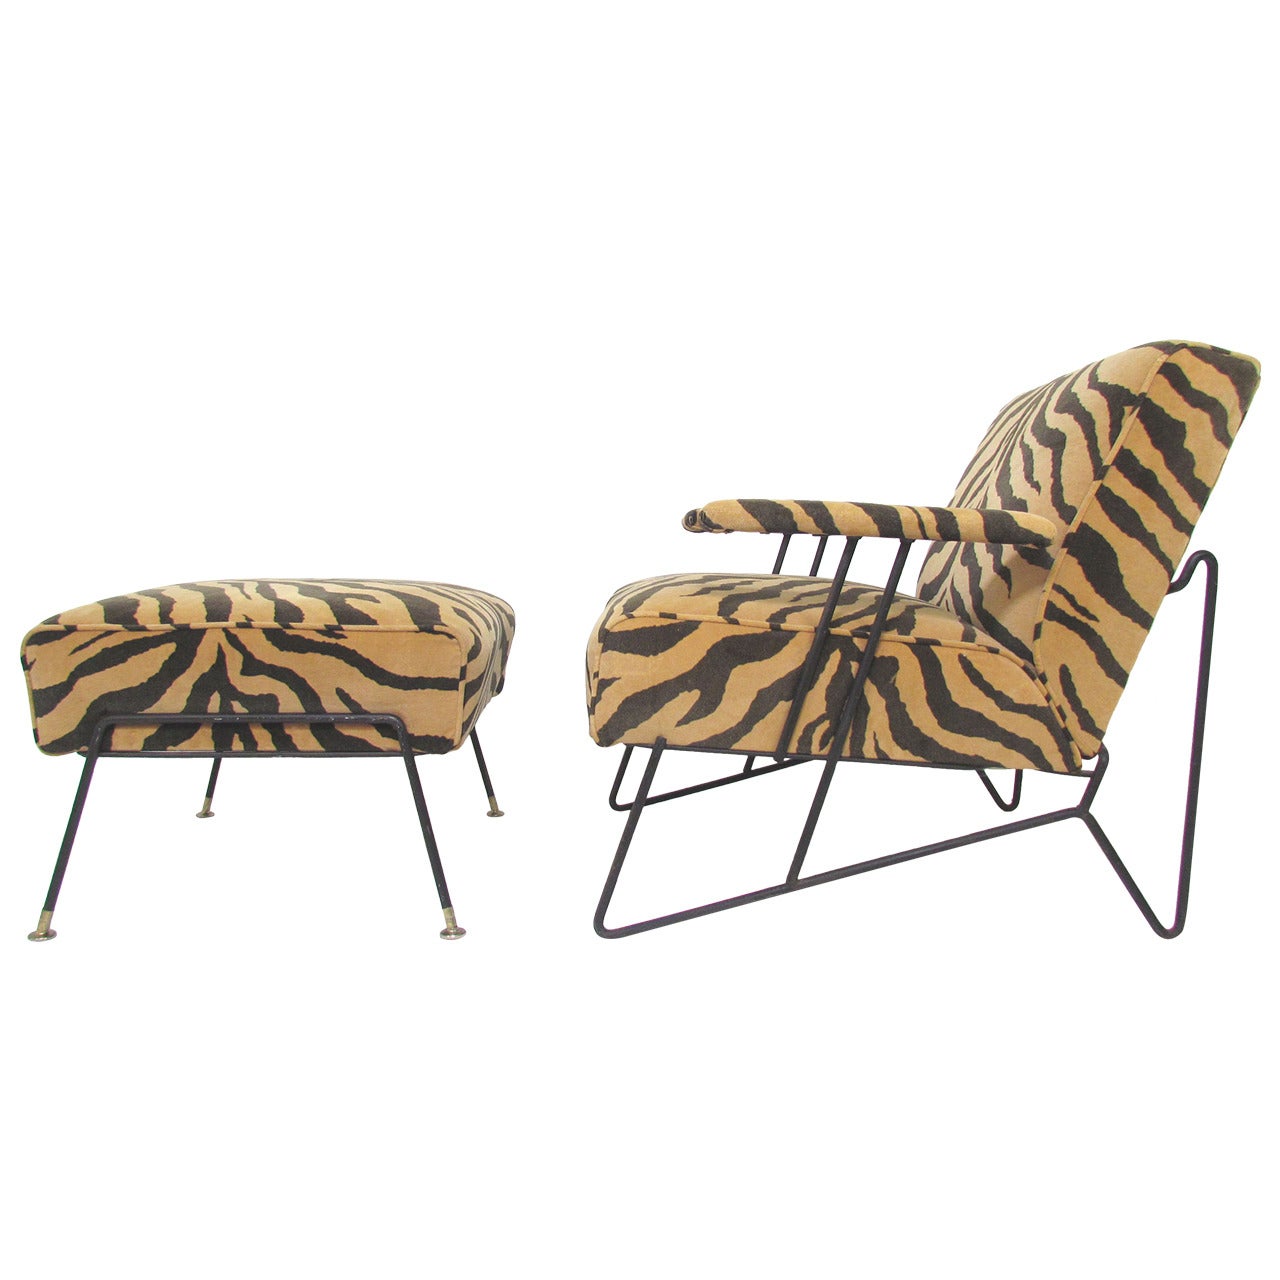 Sculptural Wrought Iron Lounge Chair and Ottoman by Dorothy Schindele